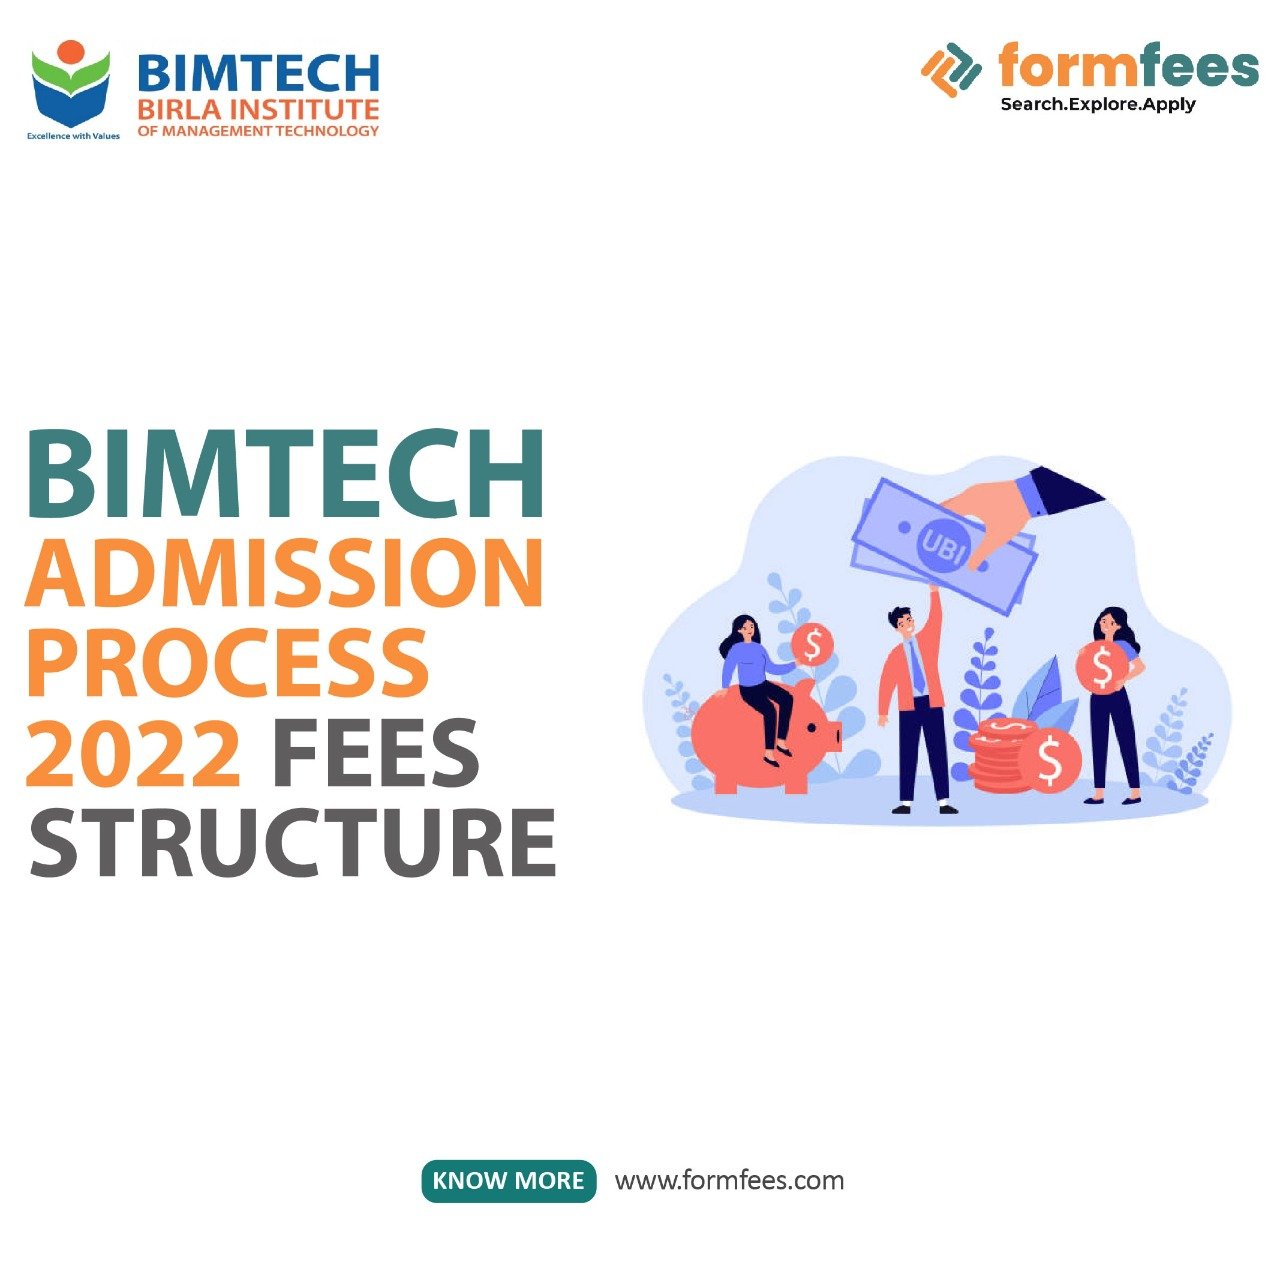 Bimtech Admission Process 2022, Fees Structure